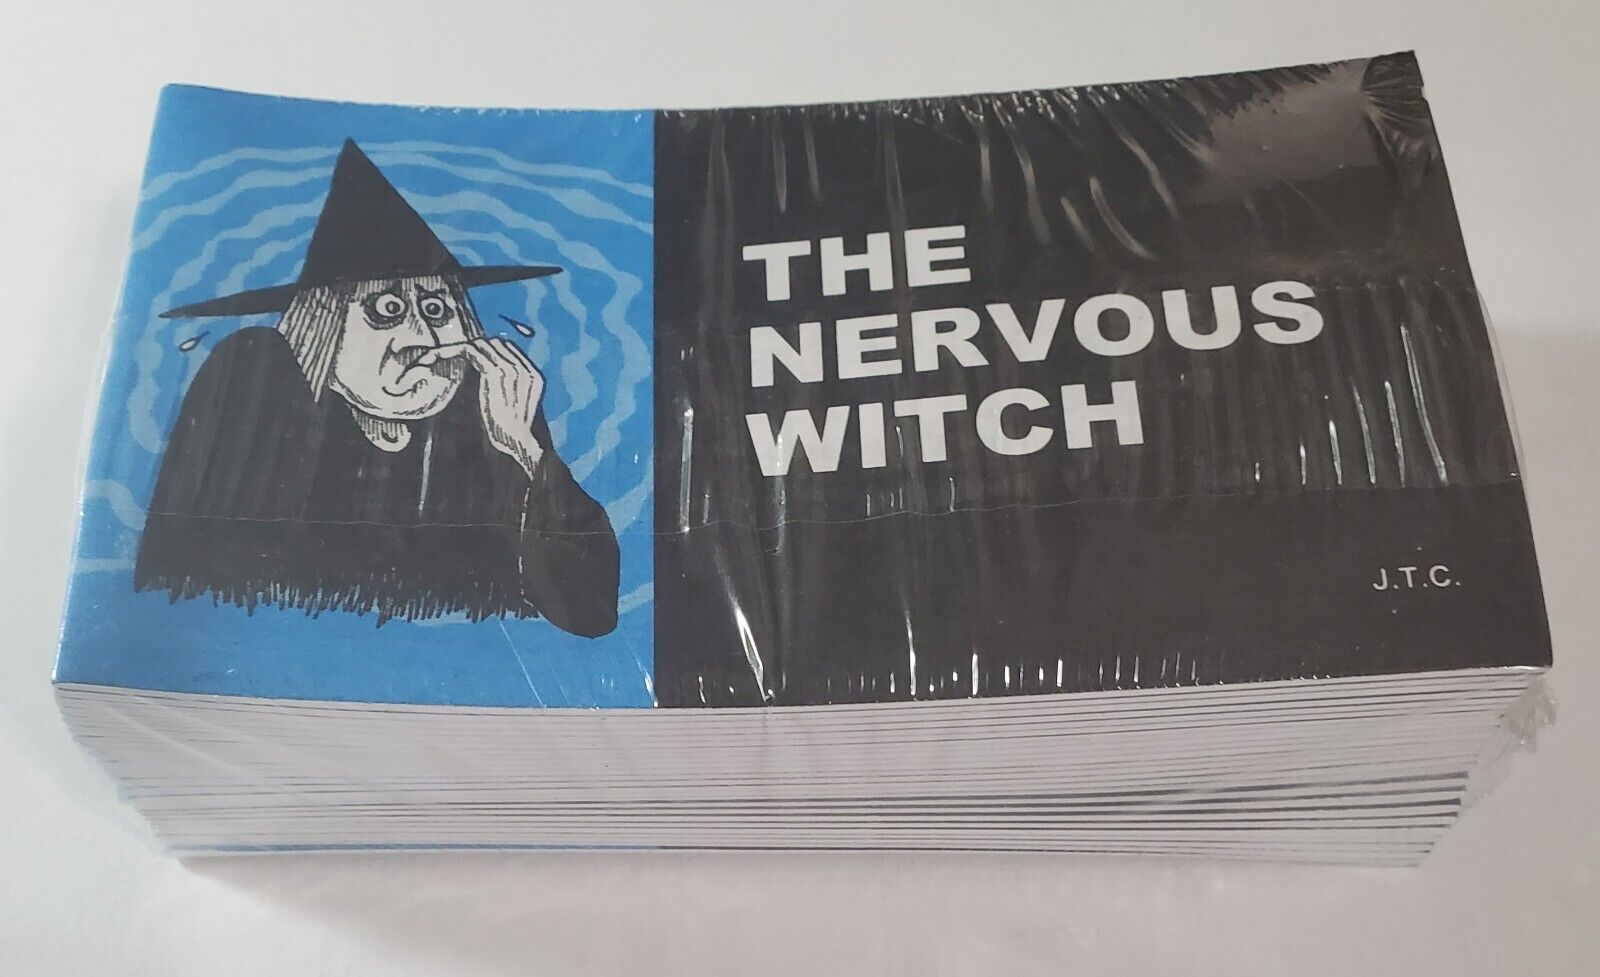 New OOP The Nervous Witch Chick Publications Tracts  Jack Chick - FULL PACK 25 